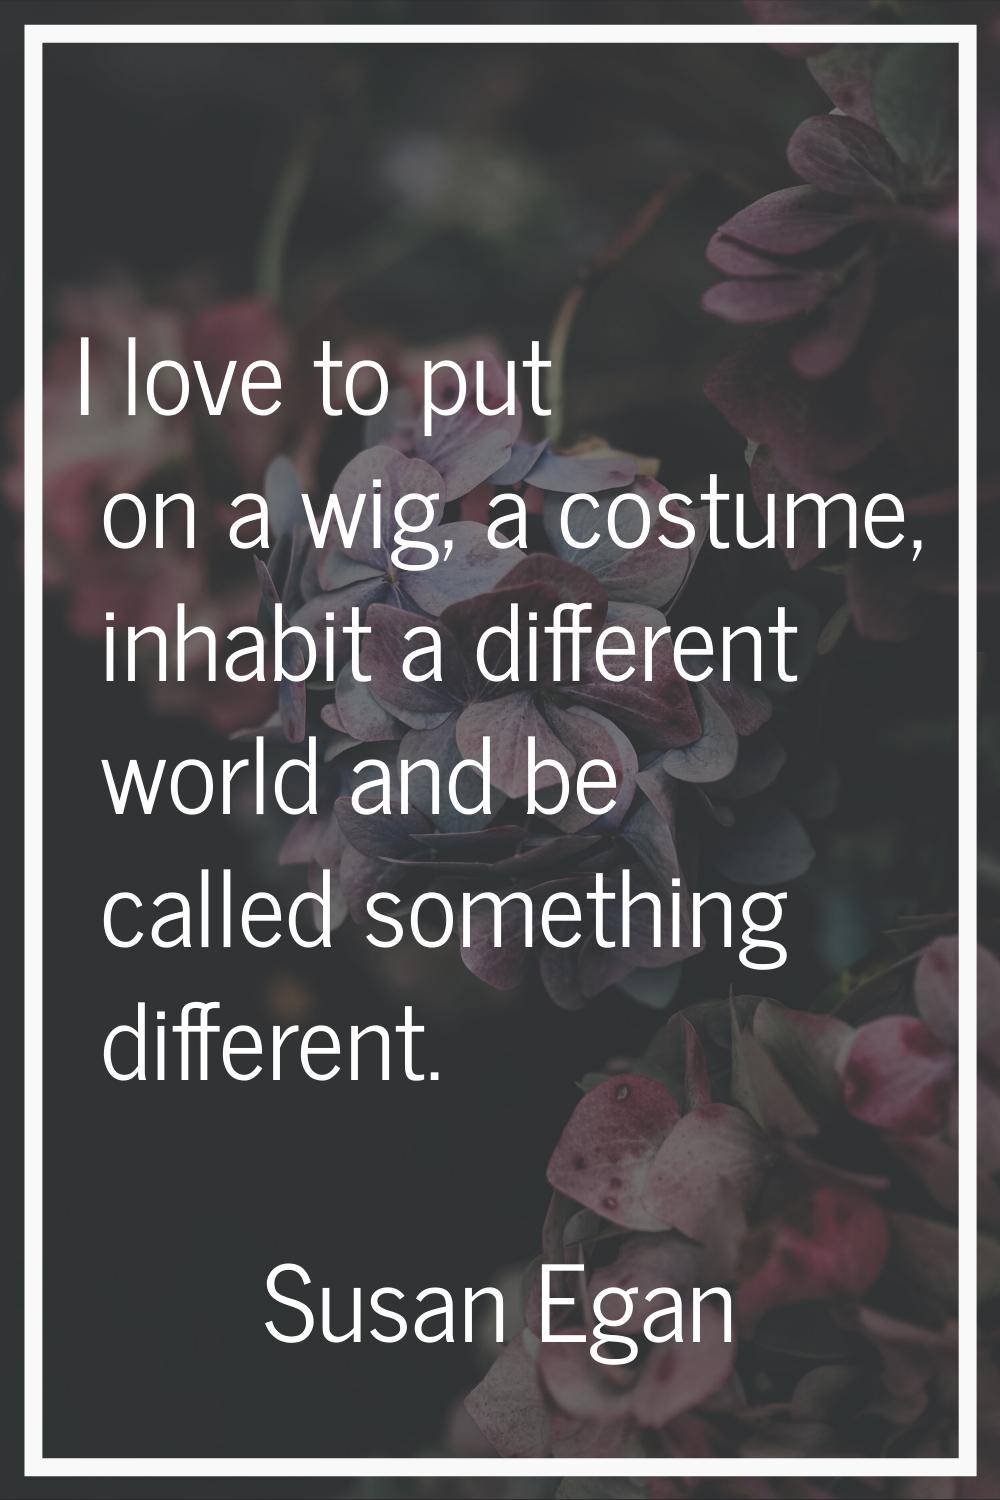 I love to put on a wig, a costume, inhabit a different world and be called something different.